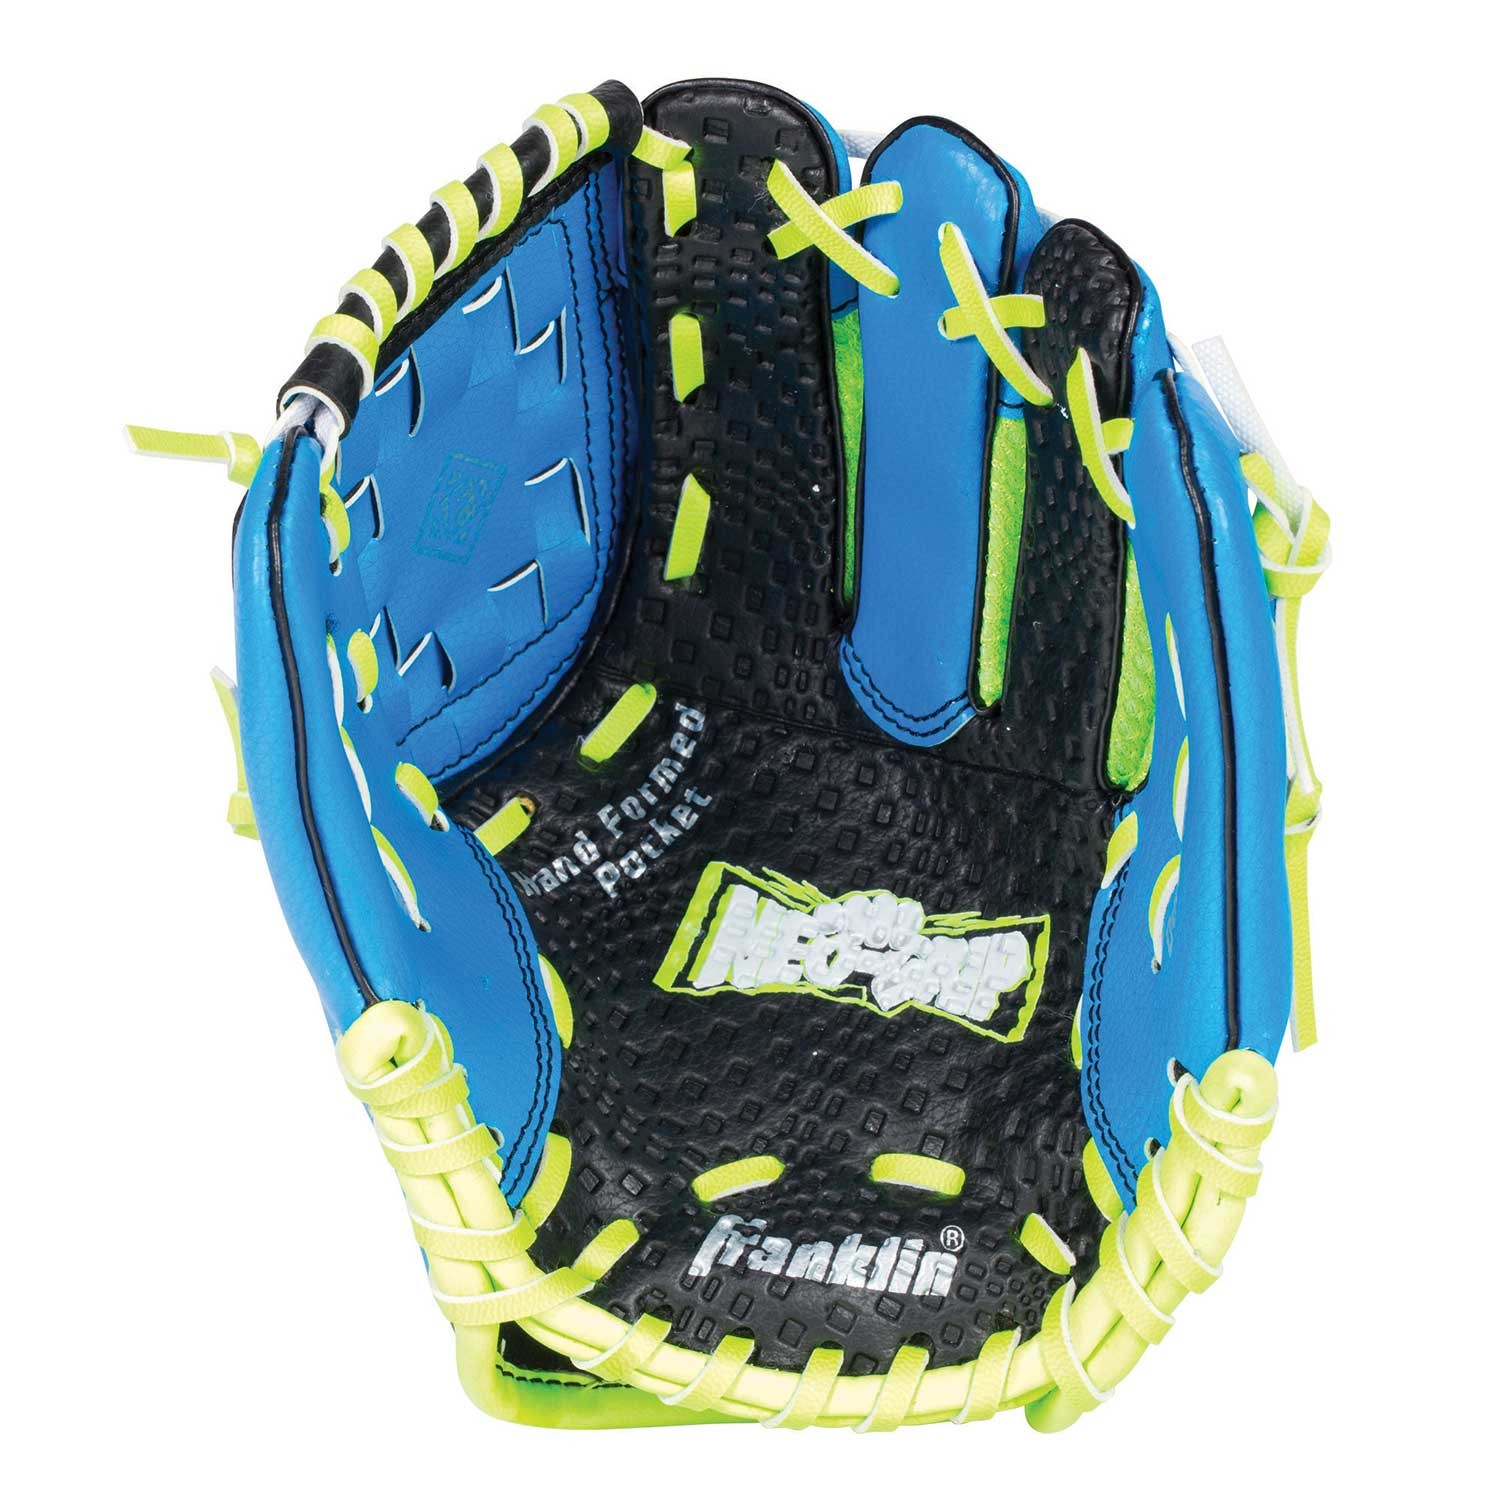 Franklin Neo Grip Glove 9 Inch with Ball – 8A00128